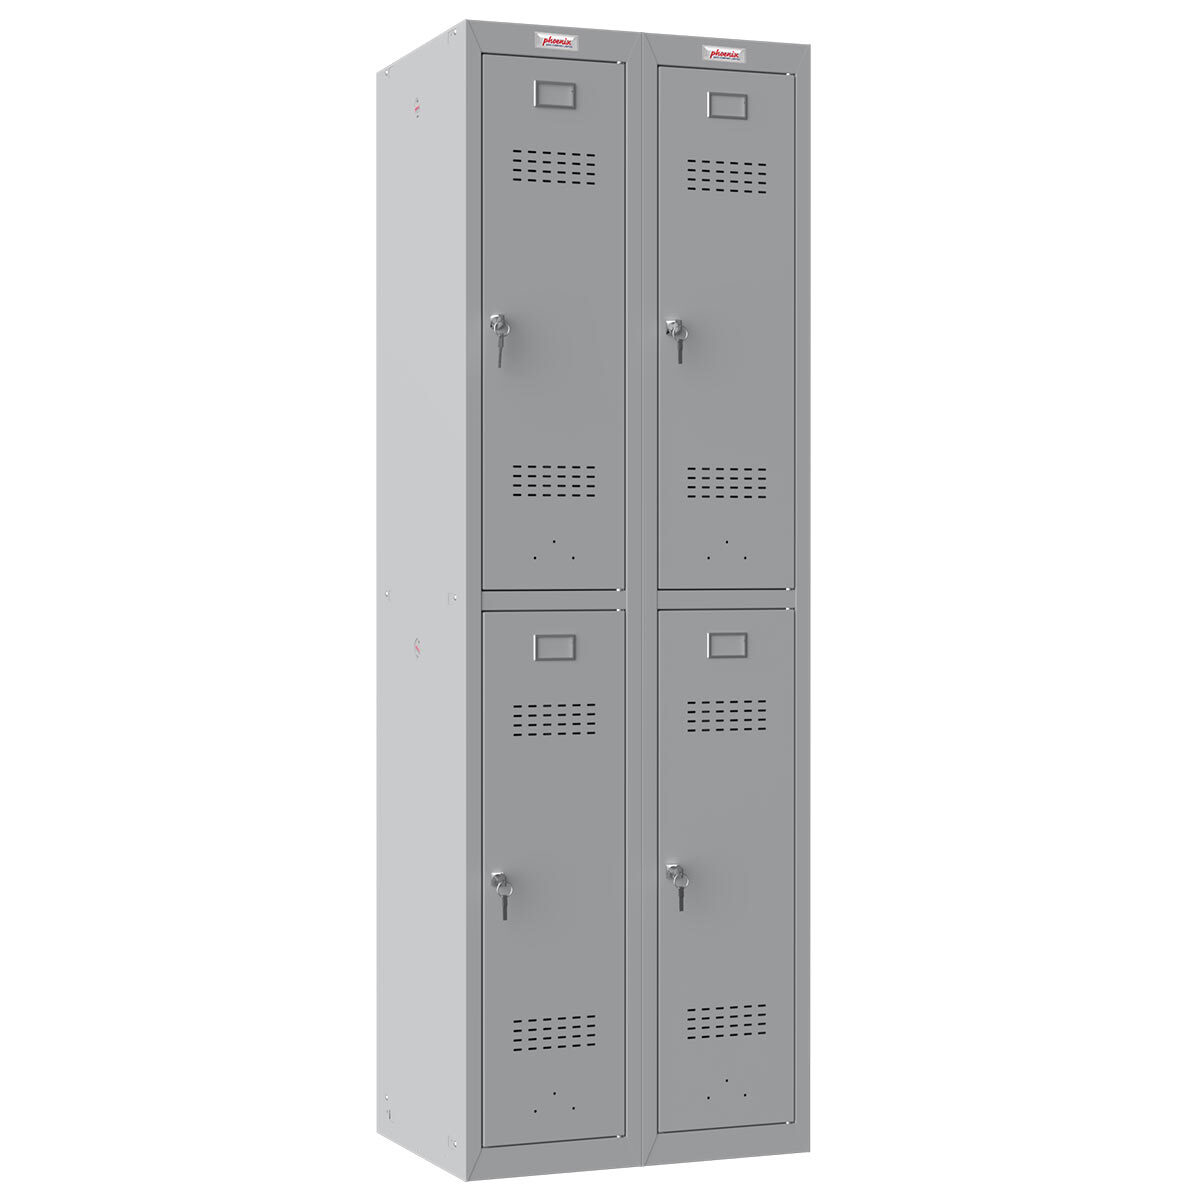 Cut out image of locker on white background